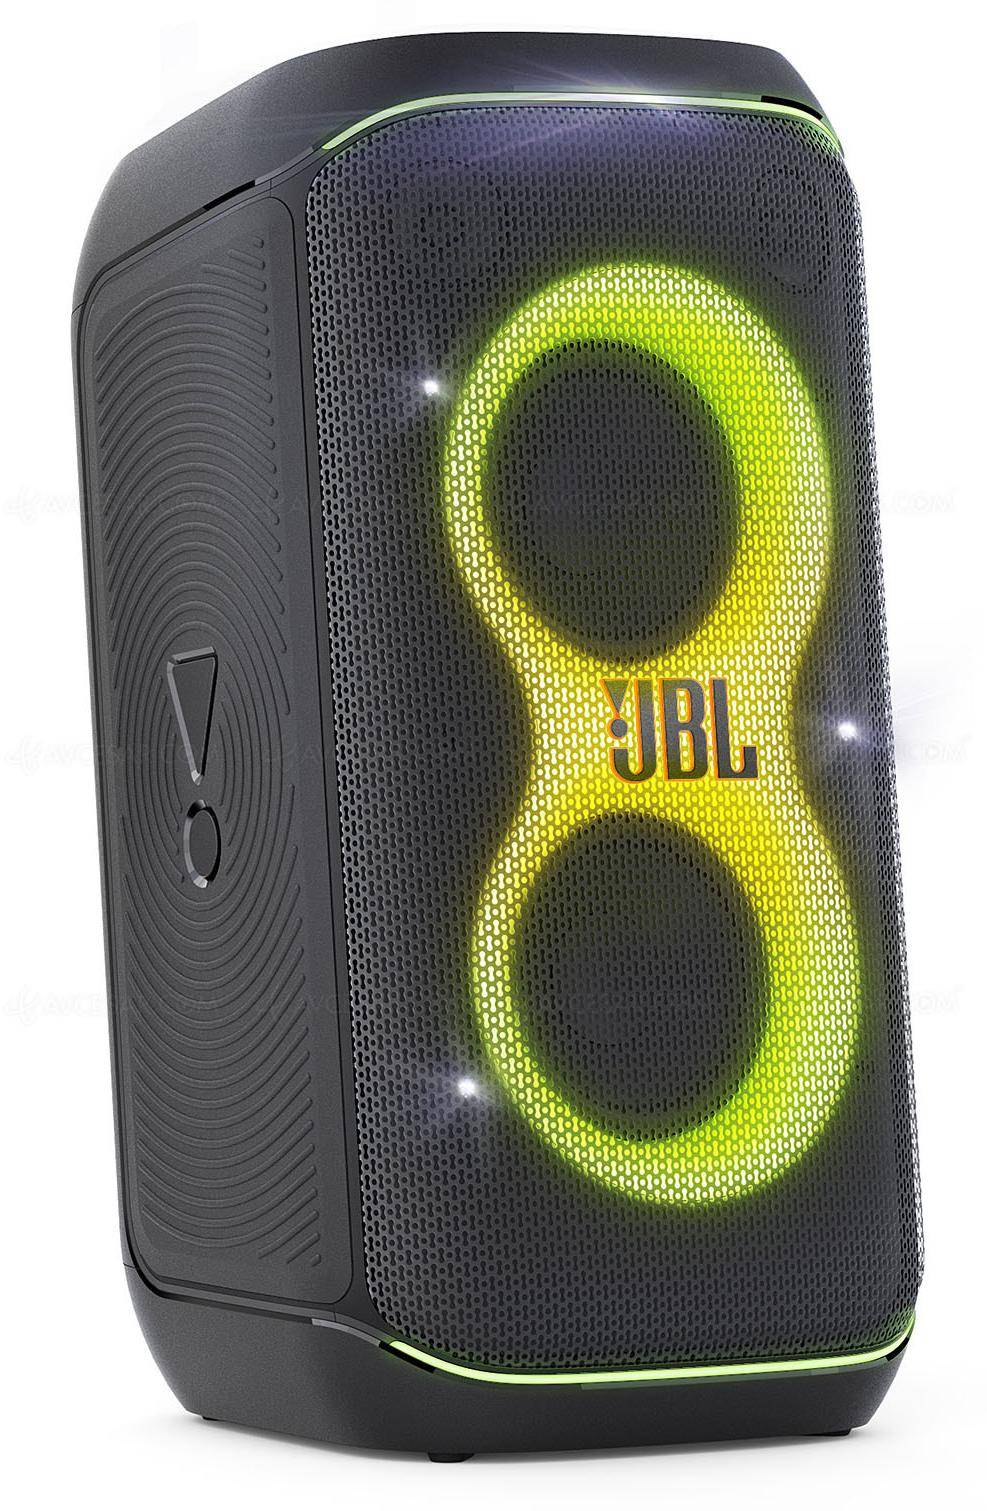 JBL Partybox 120 deeper bass with a dynamic light show Party Speaker zoom image